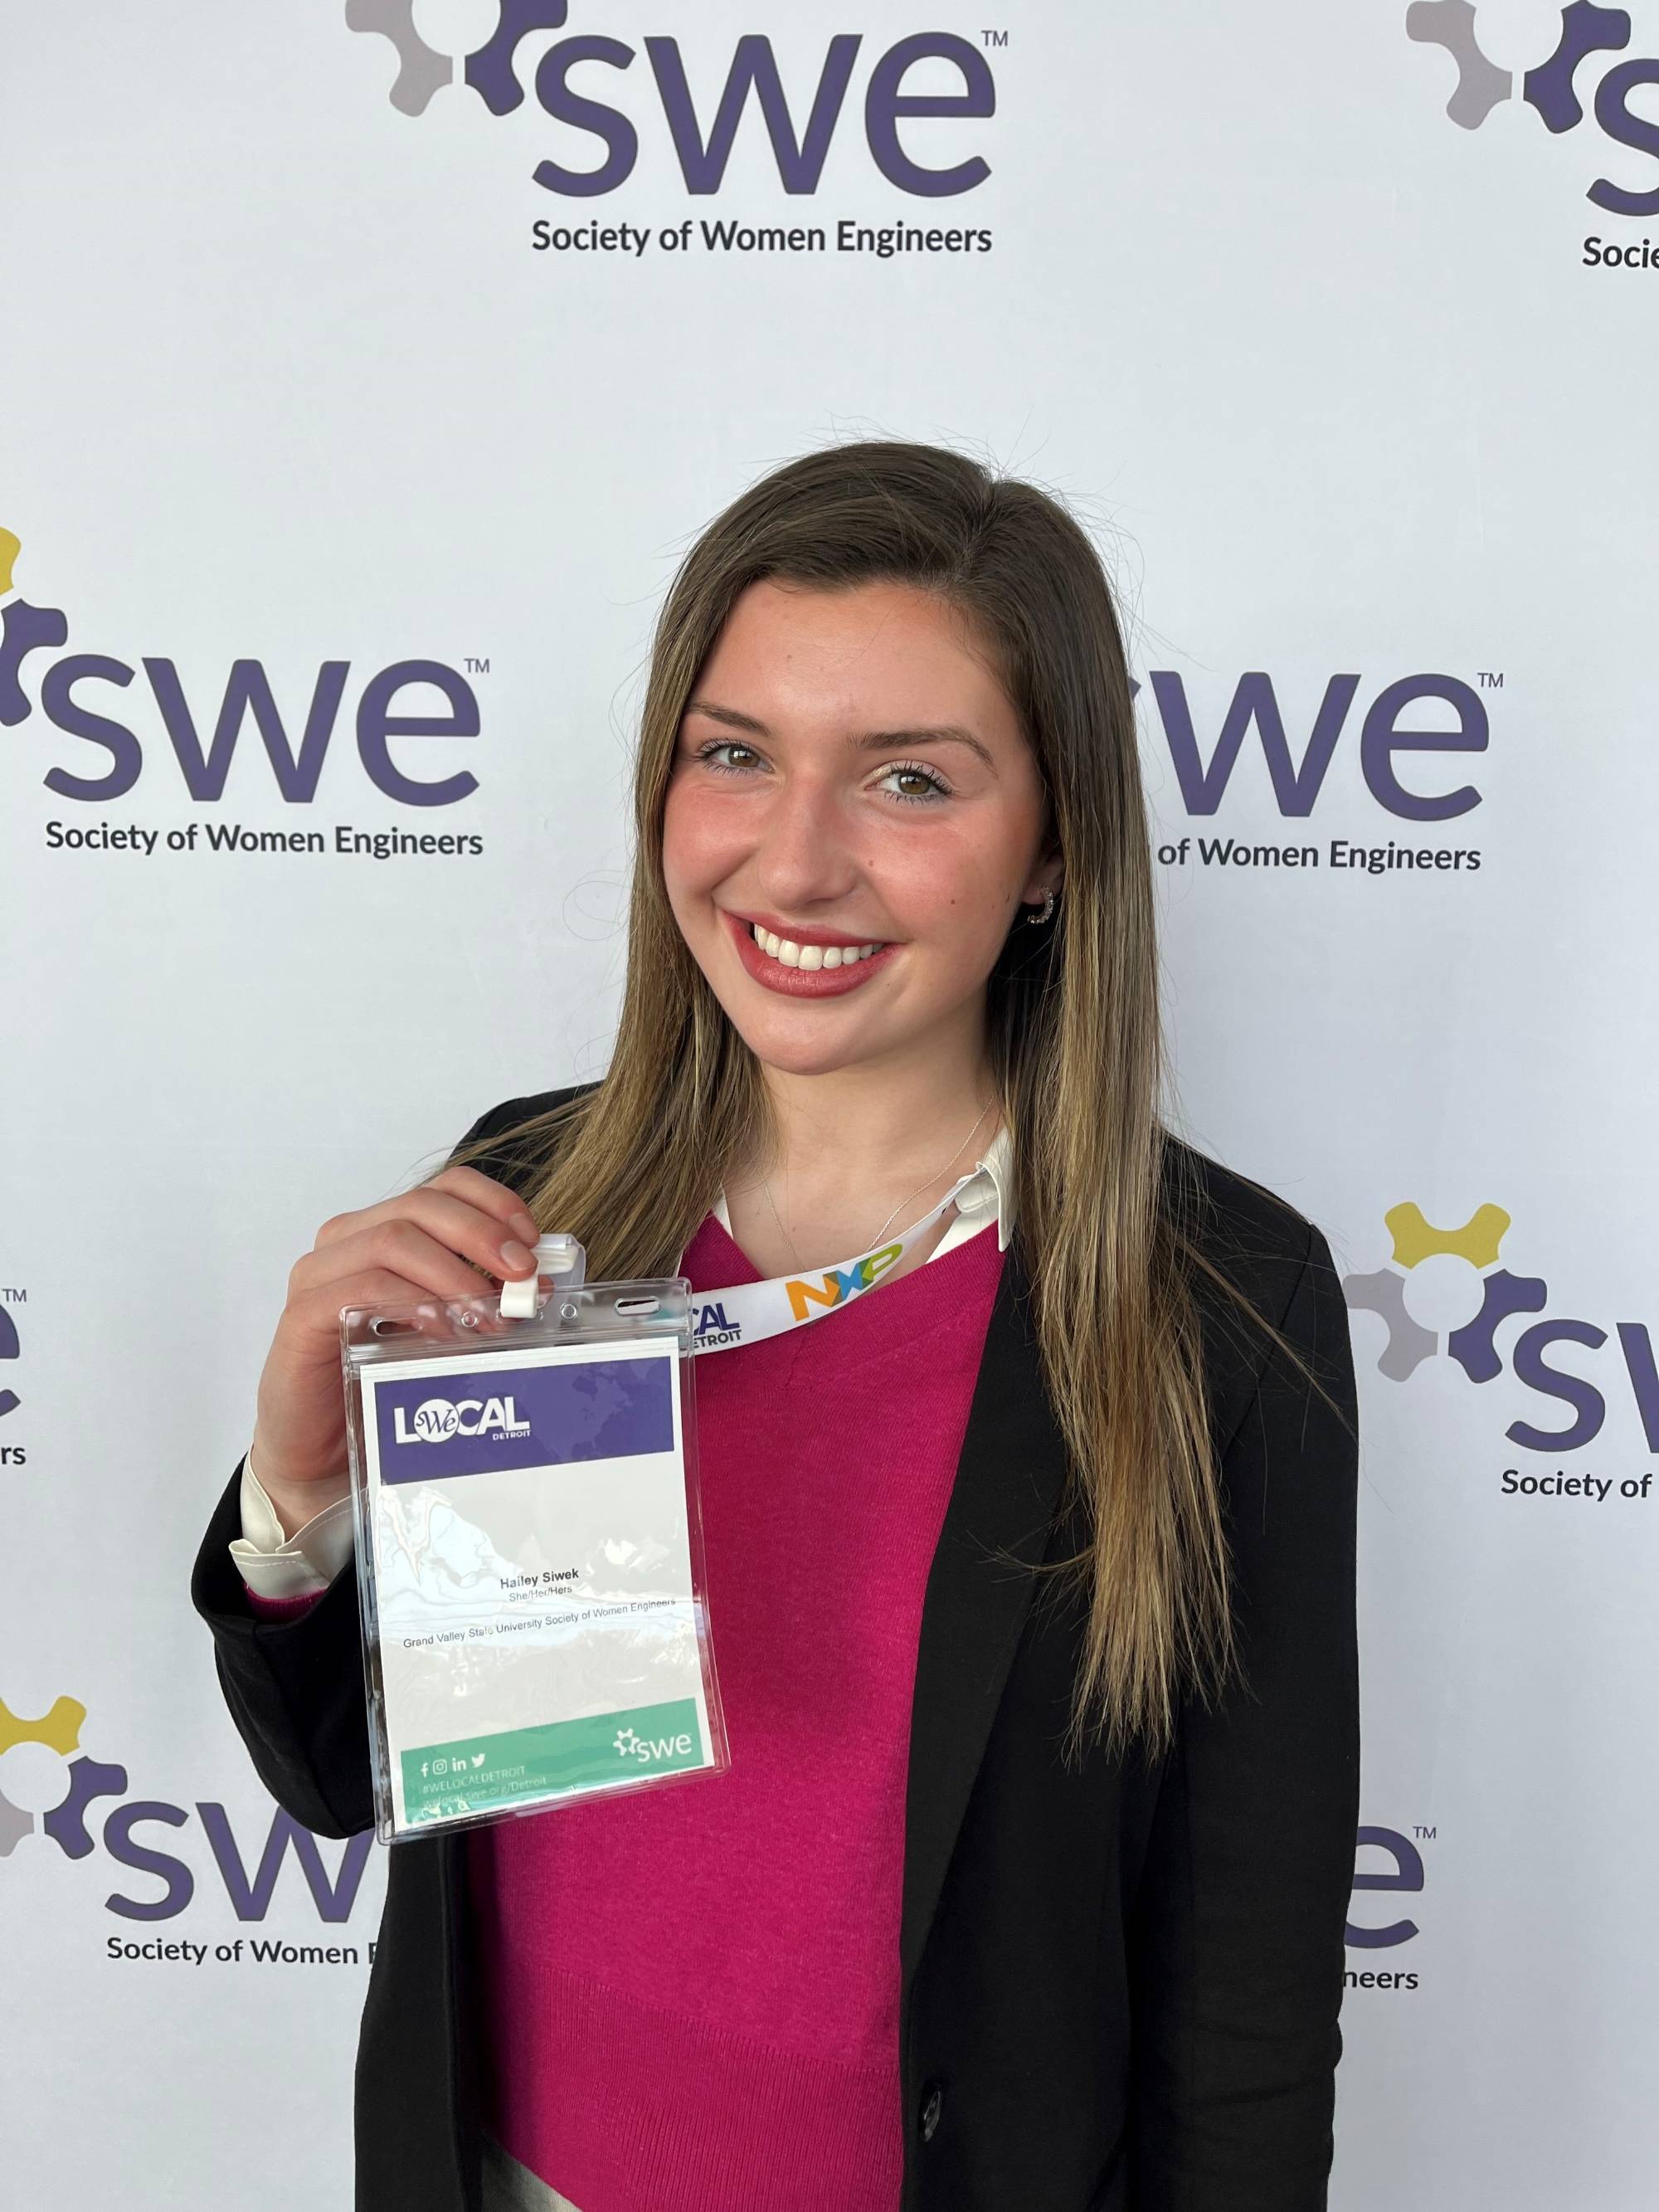 Hailey at the SWE Conference